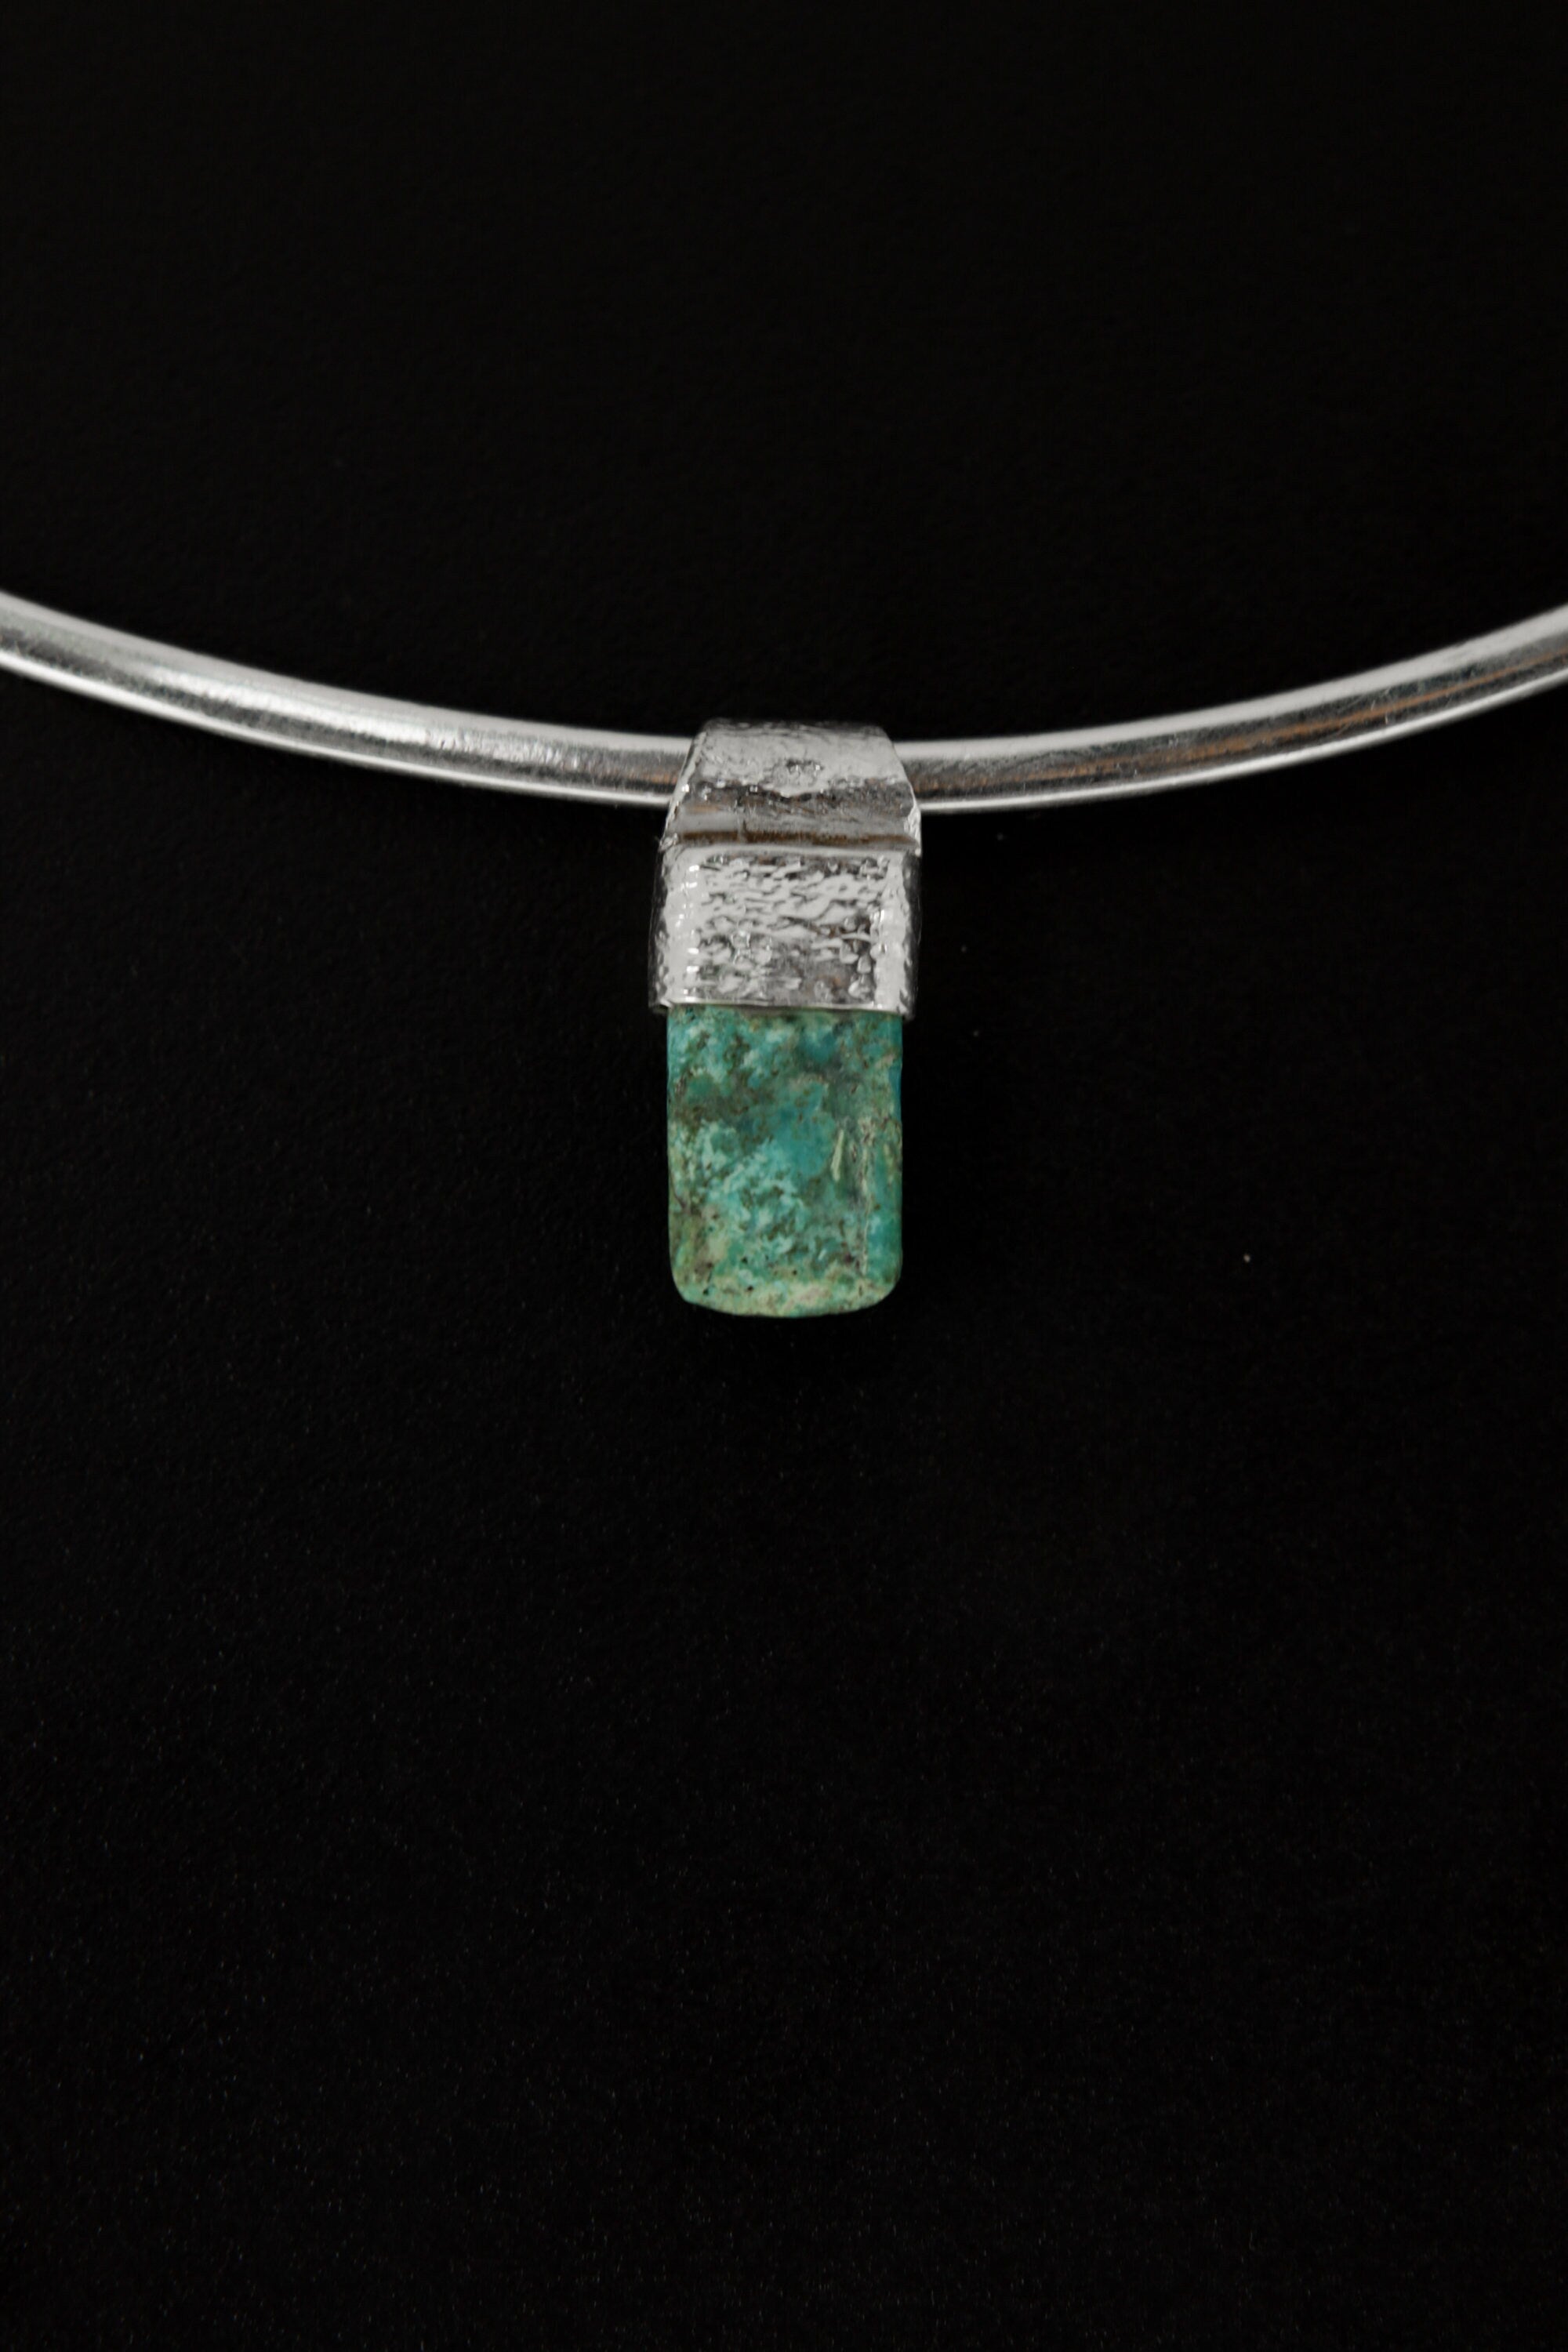 Tiny Australian Chrysocolla Cabochon - Stack Pendant - Organic Textured 925 Sterling Silver - Crystal Necklace